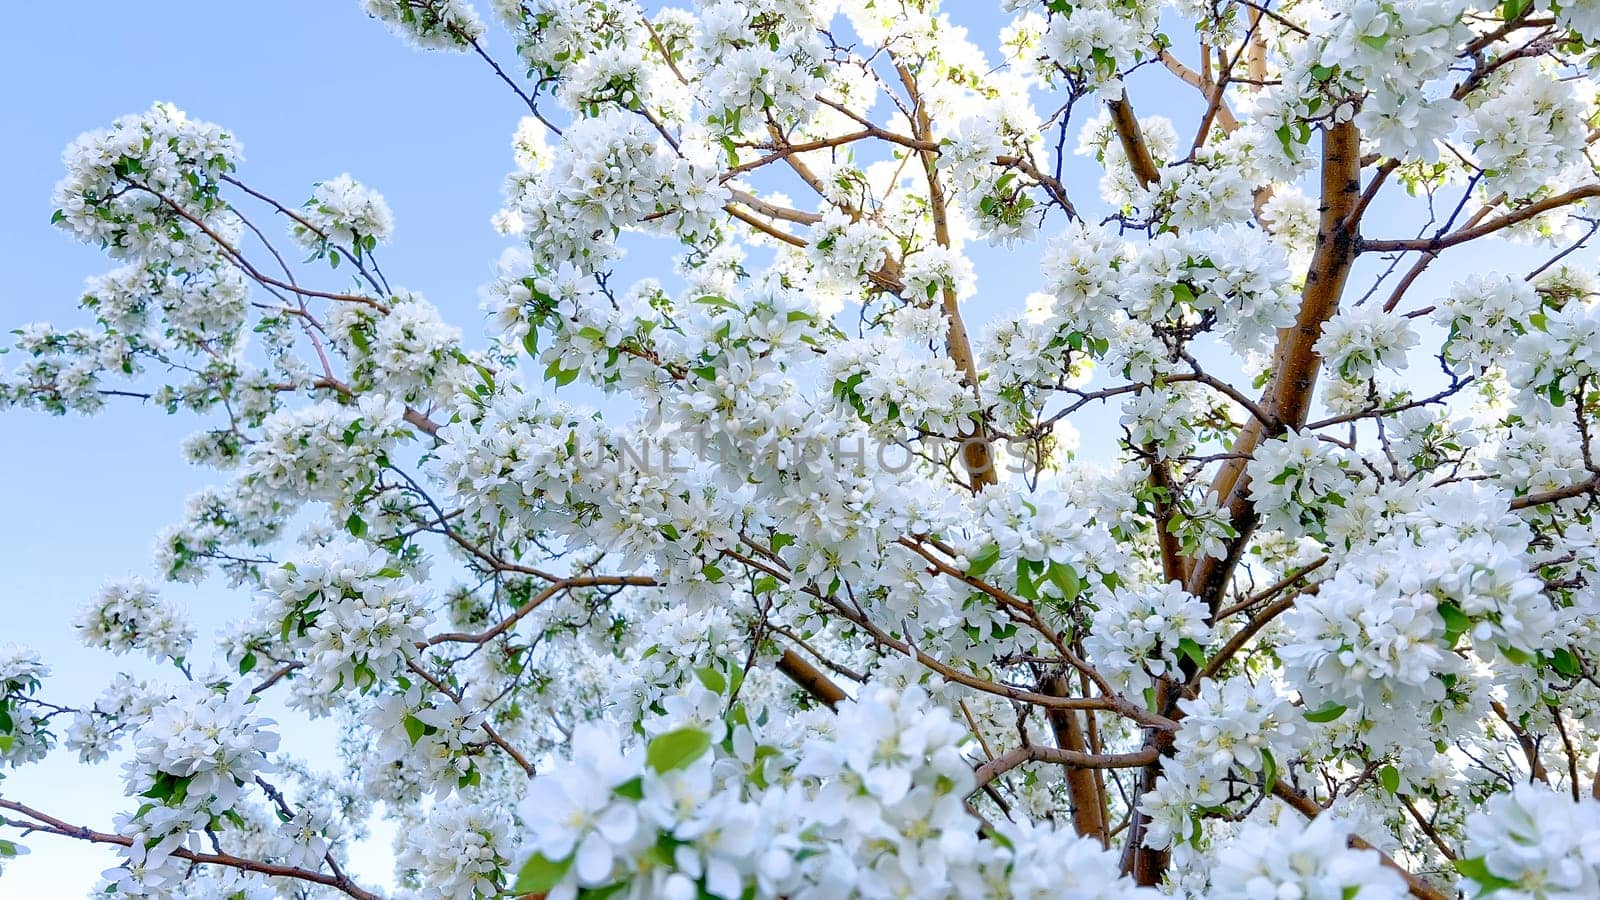 A vibrant cluster of white blossoms is in full bloom, delicately hanging from the branches of a tree, signaling the arrival of spring with their fresh, floral display.